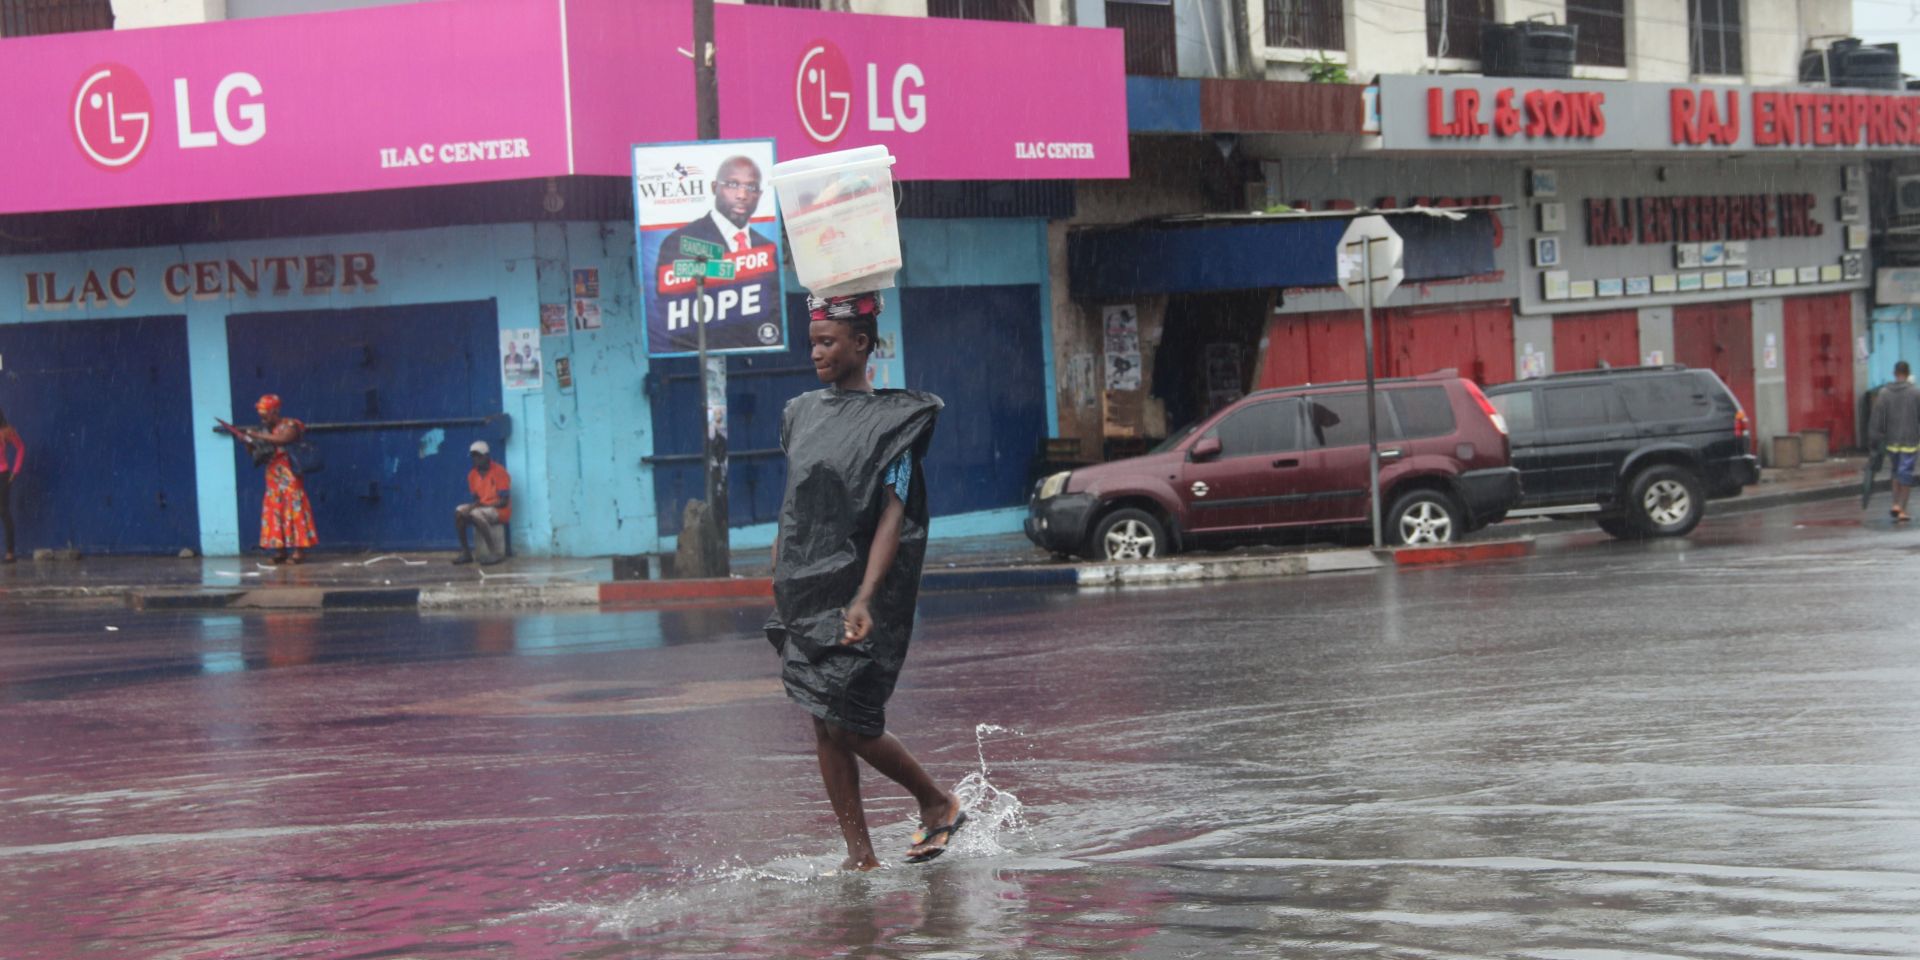 epa06181858 A woman carries a bucket on her head as she walks through  a flooded street in downtown Monrovia, Liberia 03 September 2017. According to reports torrential rains have killed, displaced, and destroyed many people and properties in some parts of West Africa, including Ghana, Niger, Nigeria, Sierra Leone and other parts of the region, due to heavy rain fall since June of this year.  EPA/AHMED JALLANZO